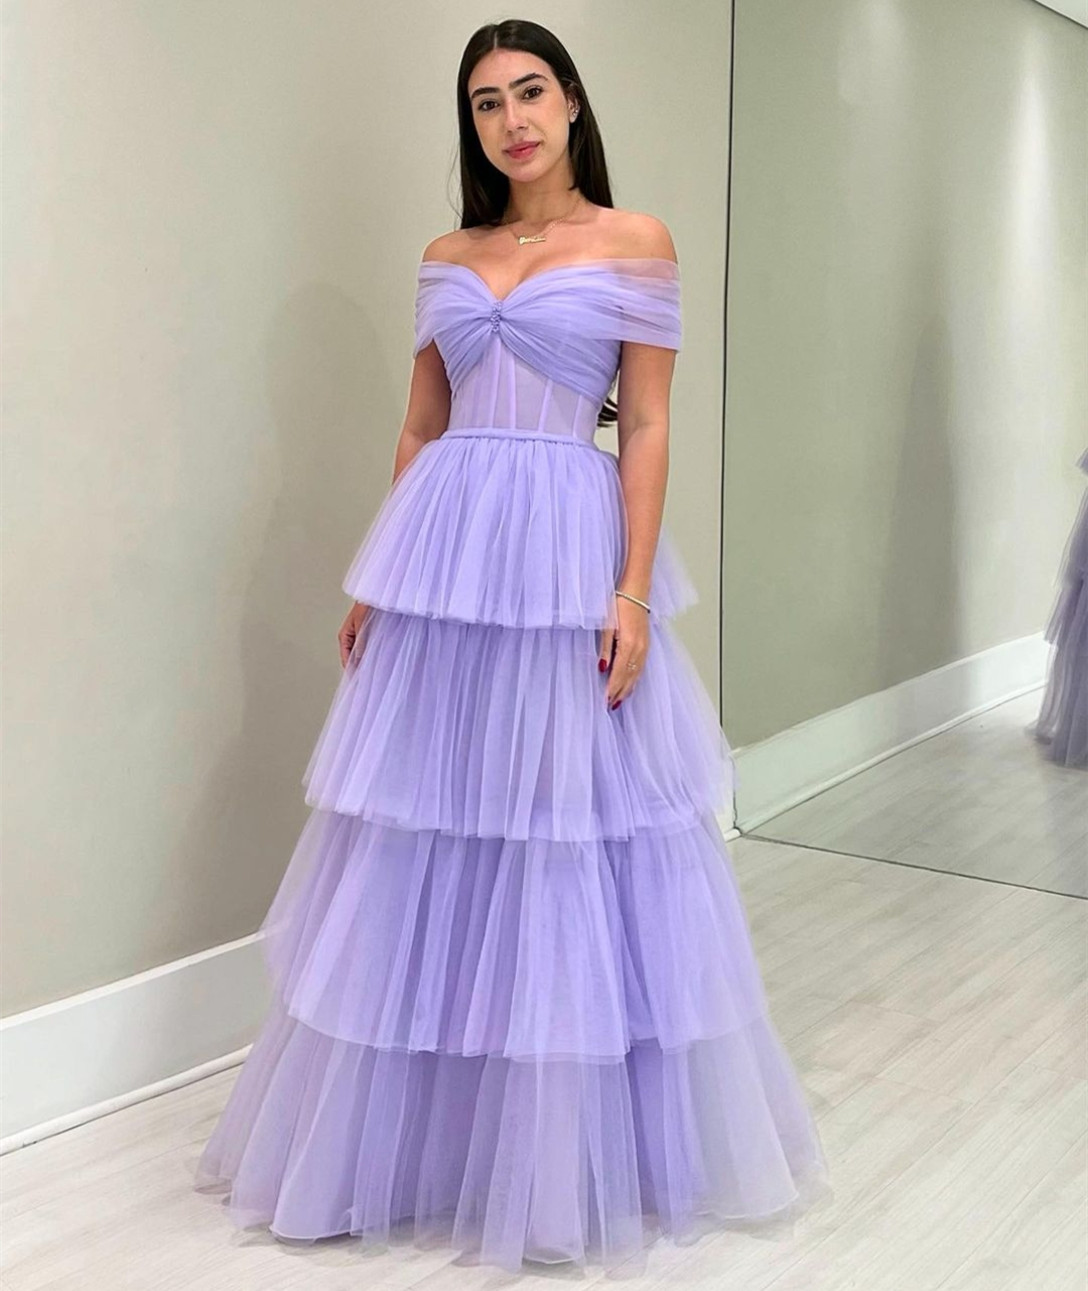 Elegant Long Lilac Tulle Prom Dresses with Tieres A-Line Off Shoulder Pleated Floor Length Lace Up Back Prom Dresses for Women